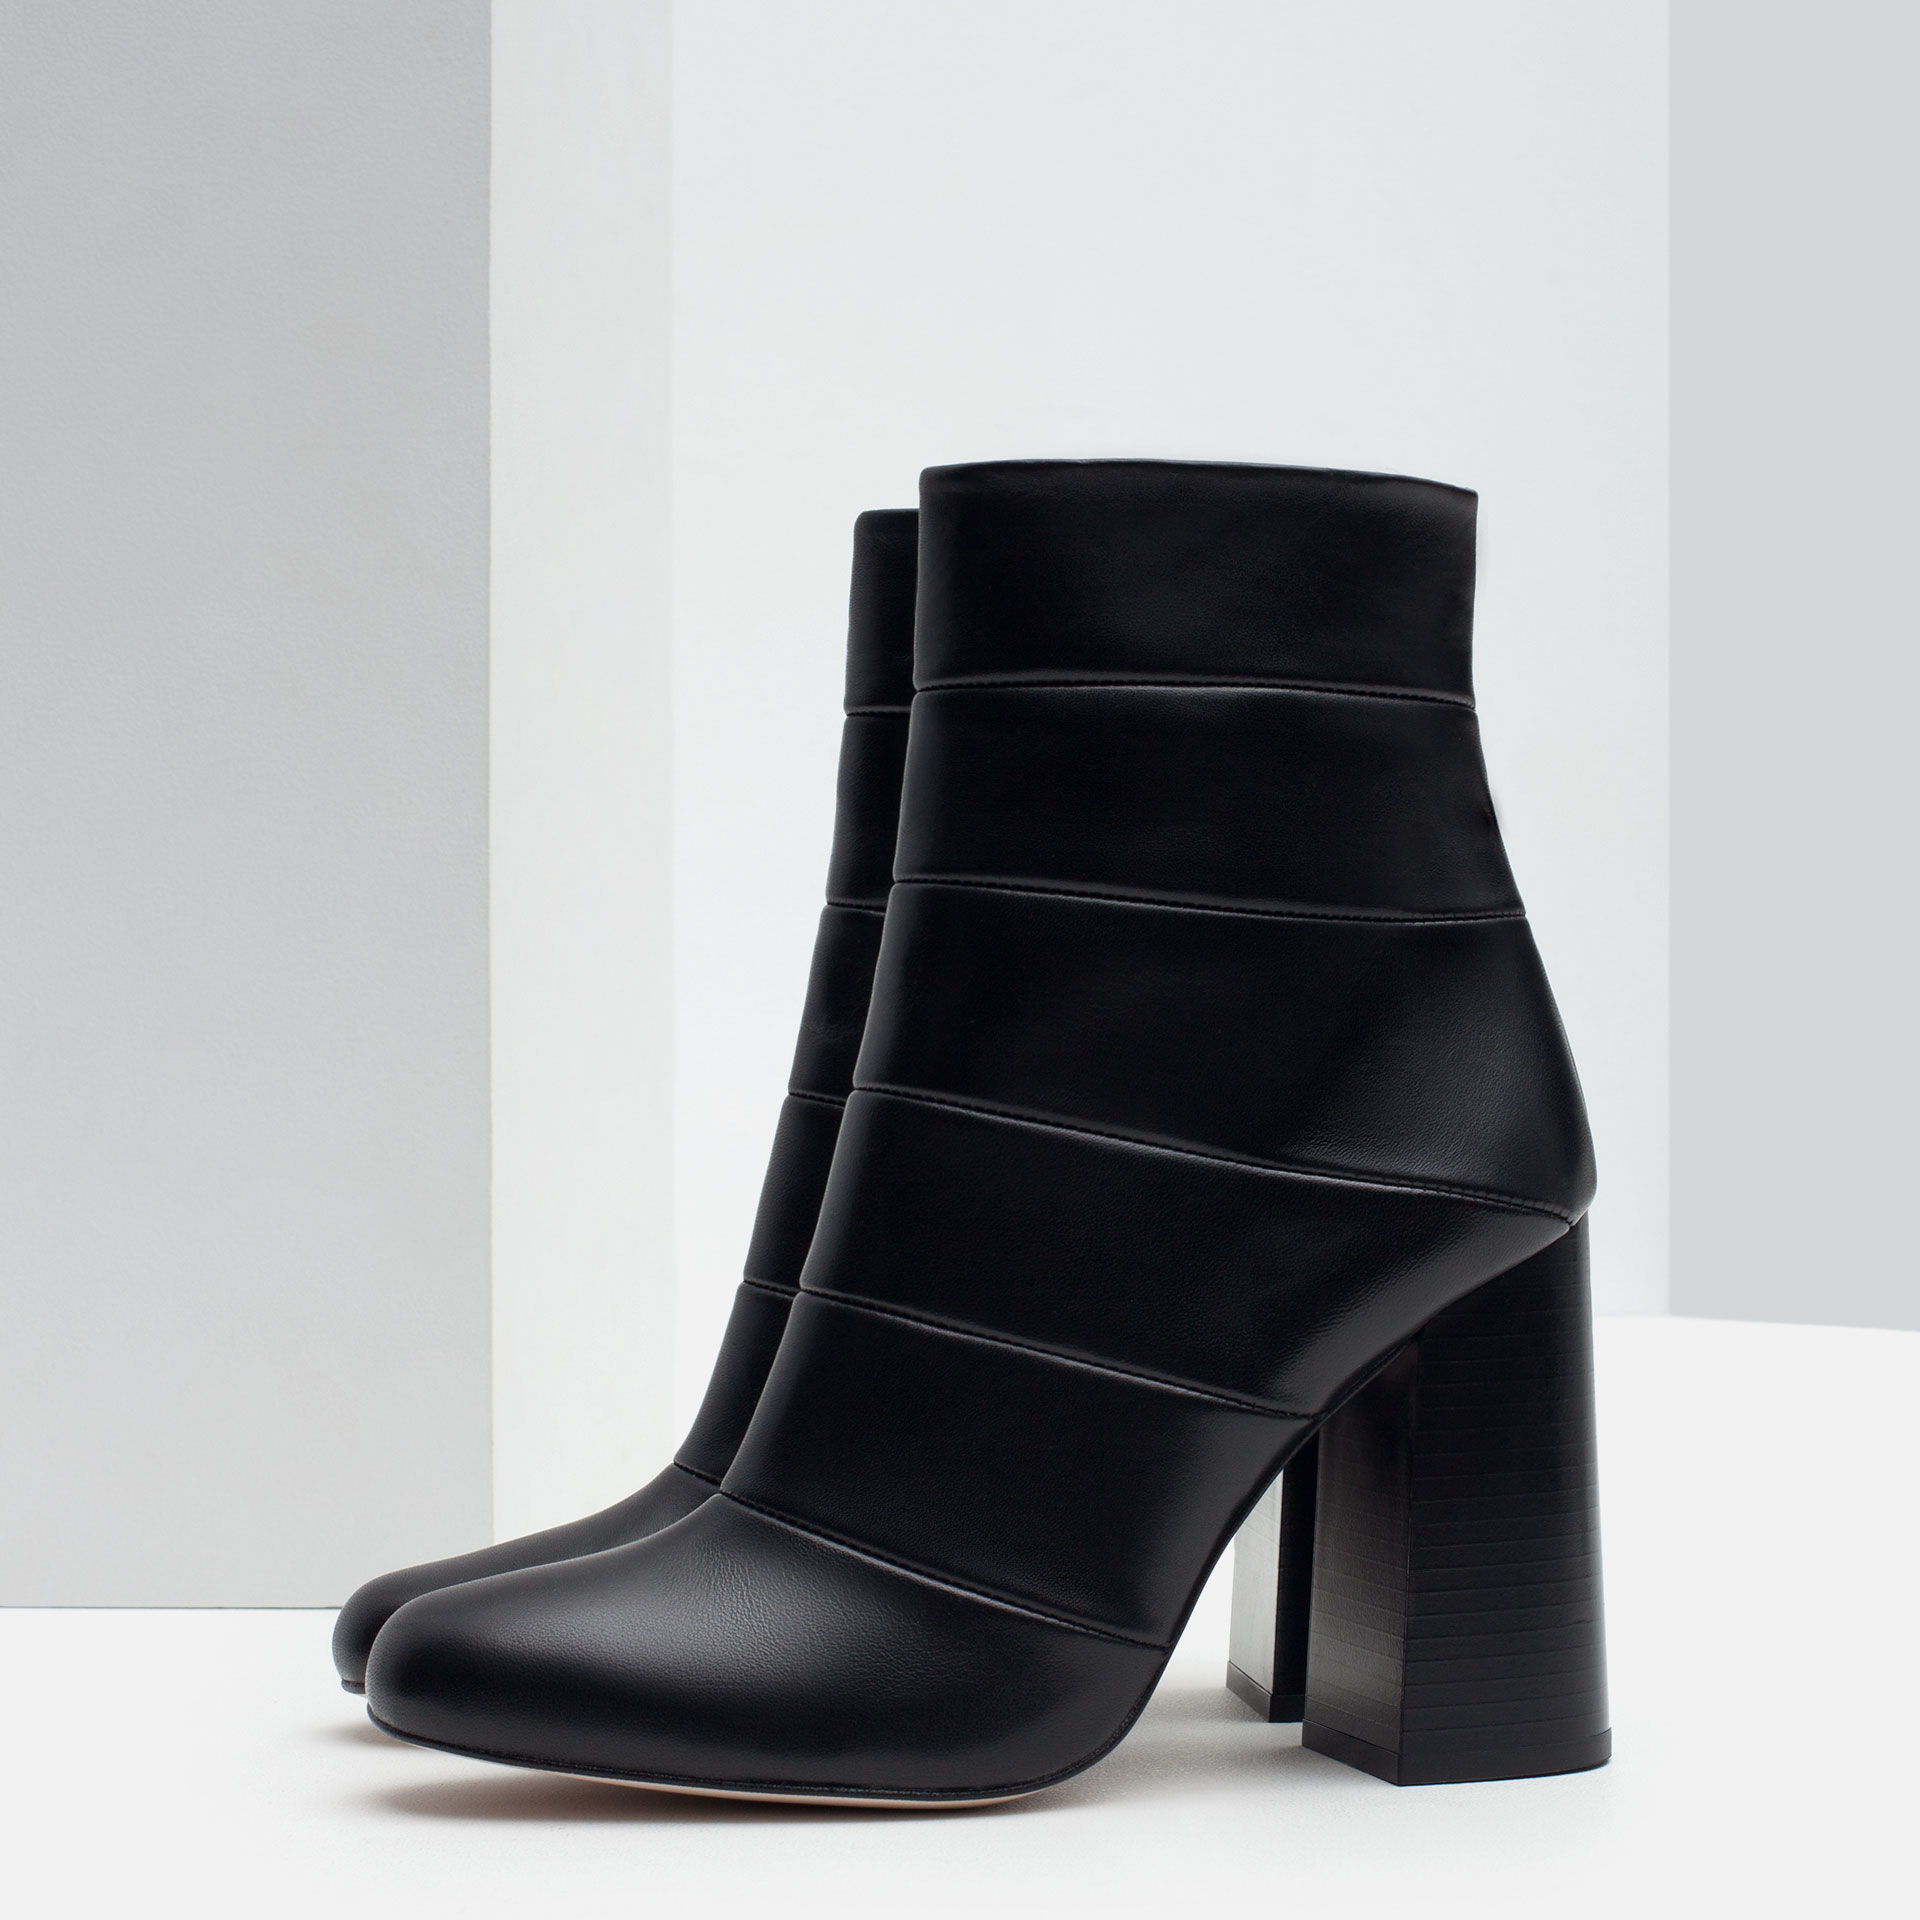 Zara High Heel Combined Leather Ankle Boots in Black | Lyst